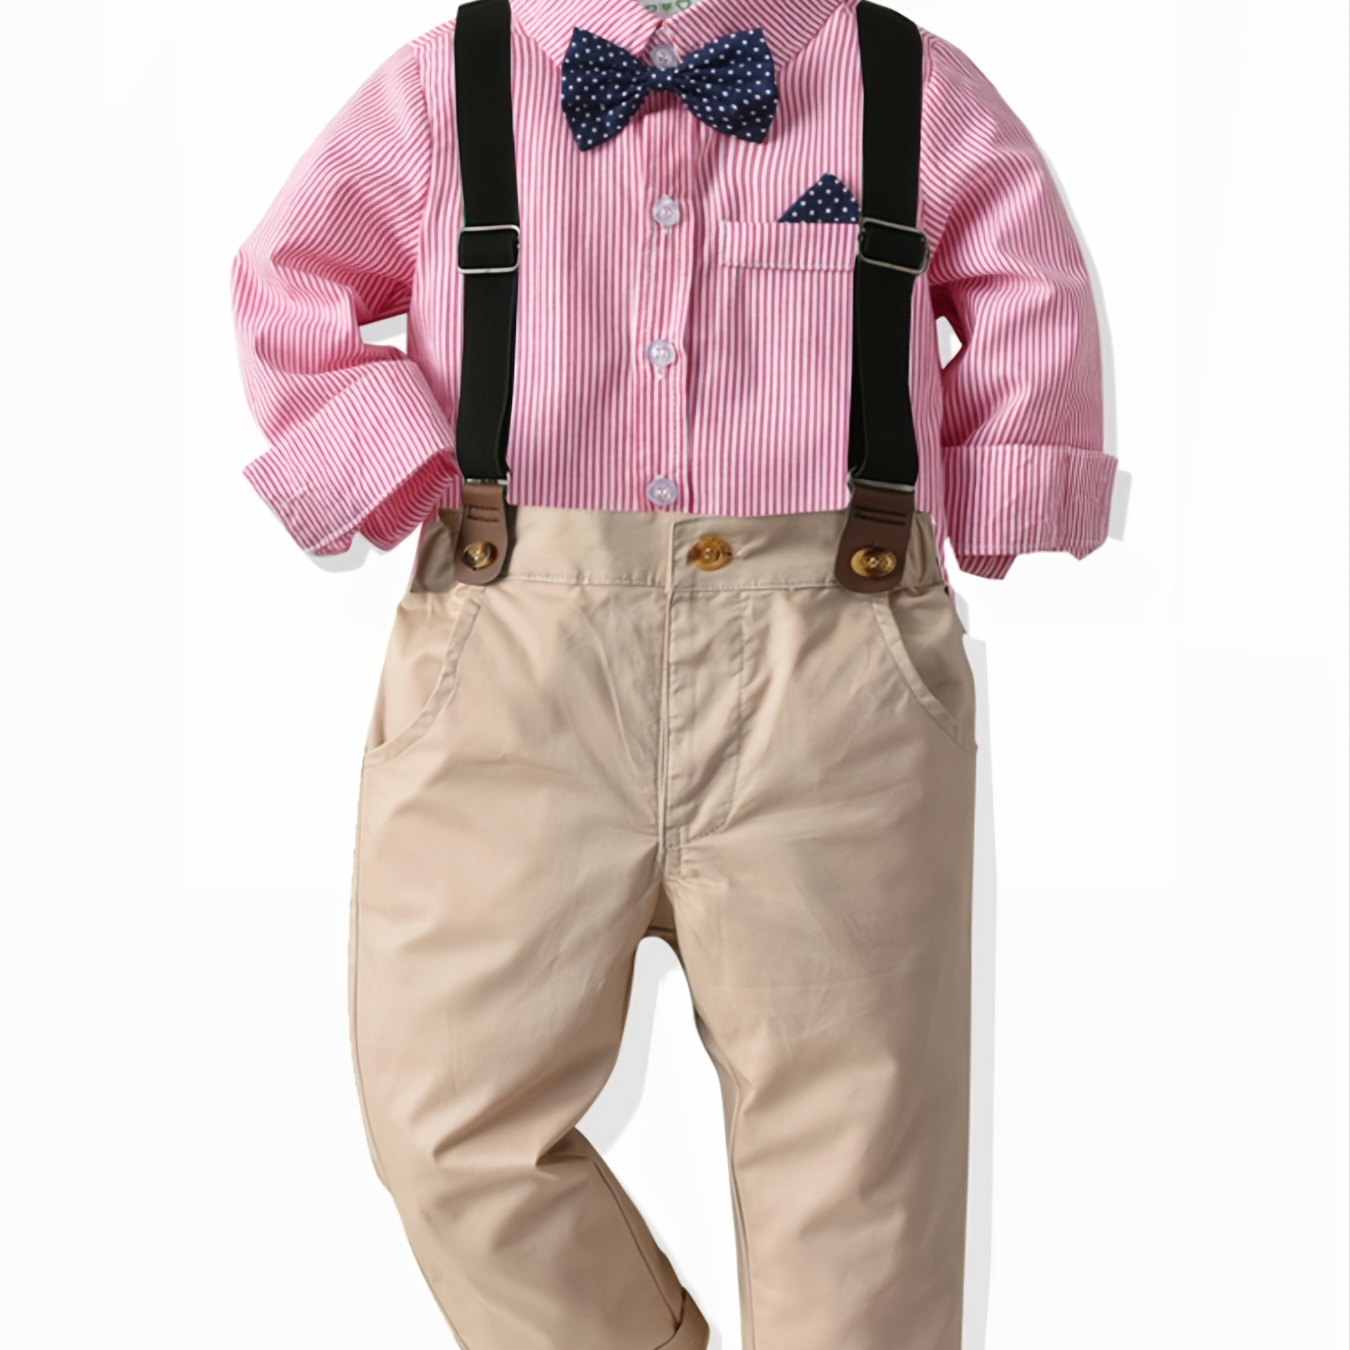 

Baby Boys Gentleman Outfit Long Sleeve Button Down Bowtie Striped Shirt & Suspender Pants Set Kids Clothes